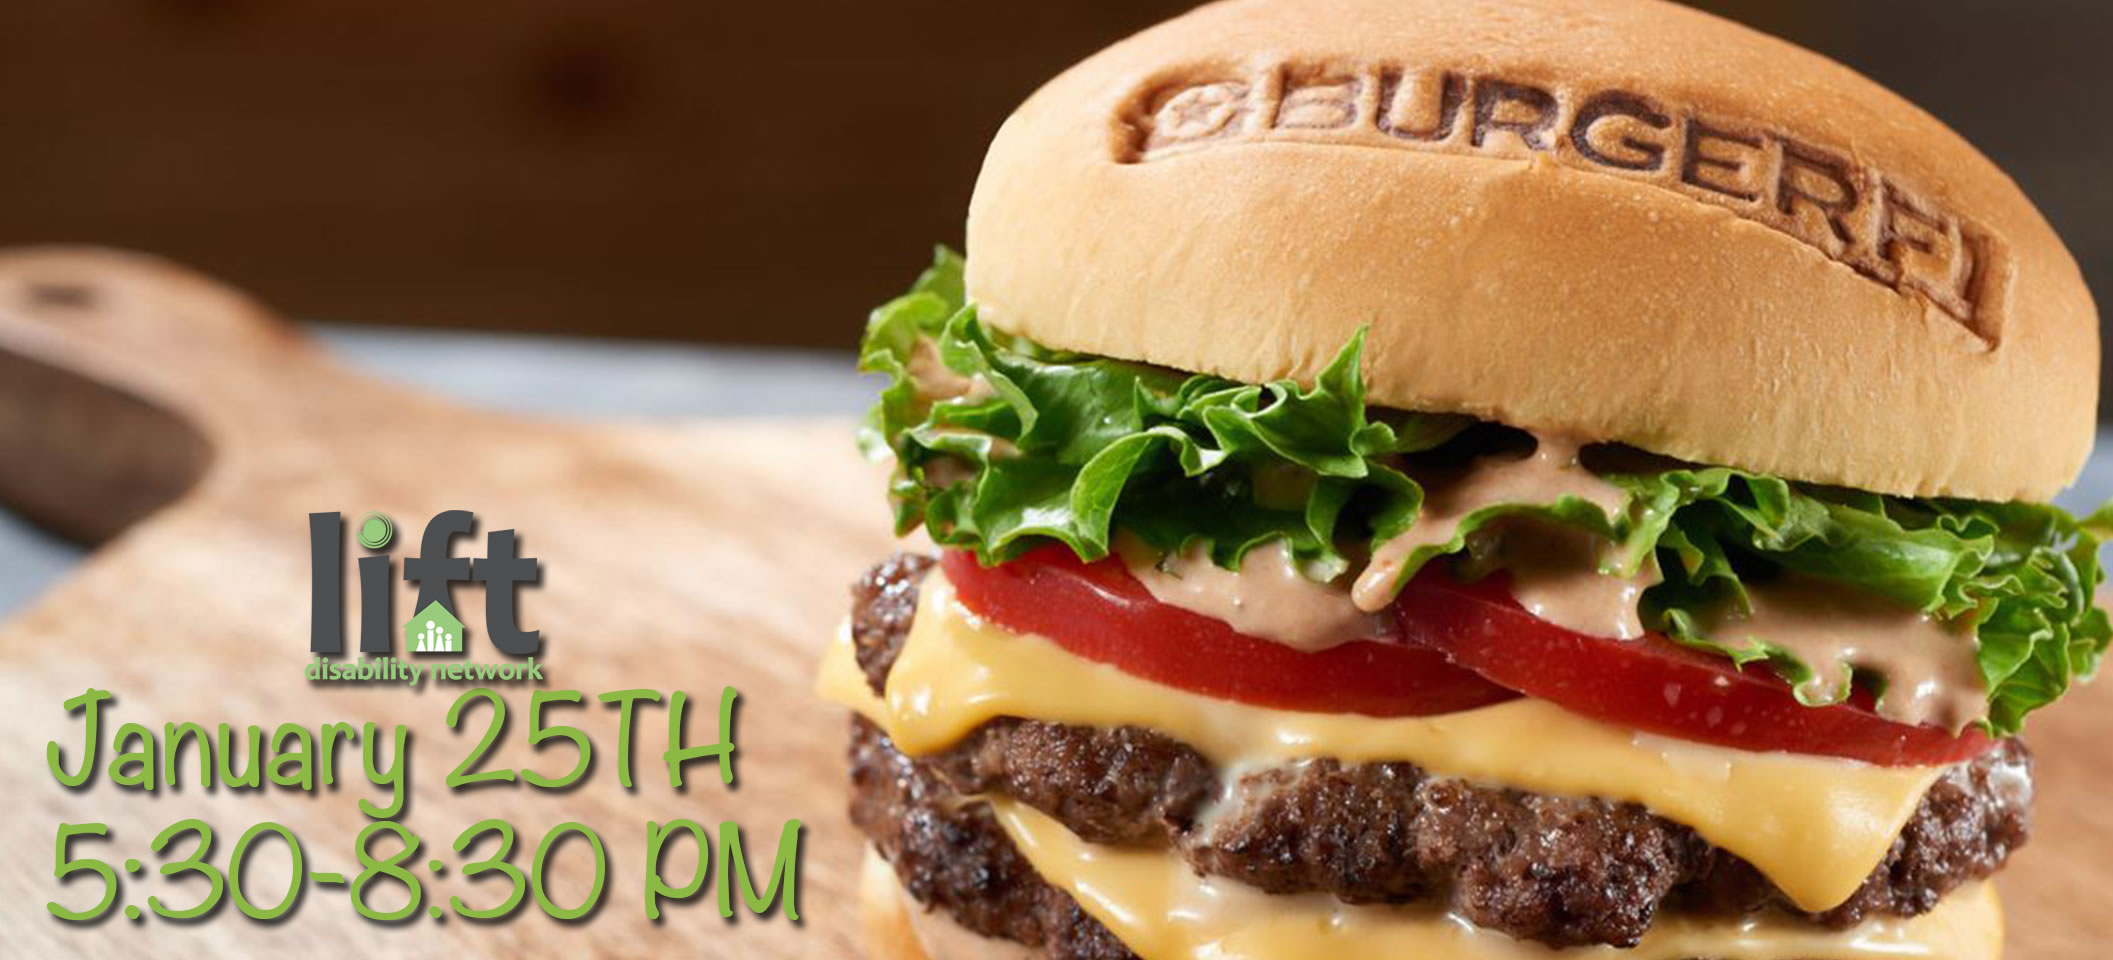 Image: a juicy burger web banner. Join us for Bugerfi spirit night supporting Lift Disability Network January 25 5:30-8:30 PM.